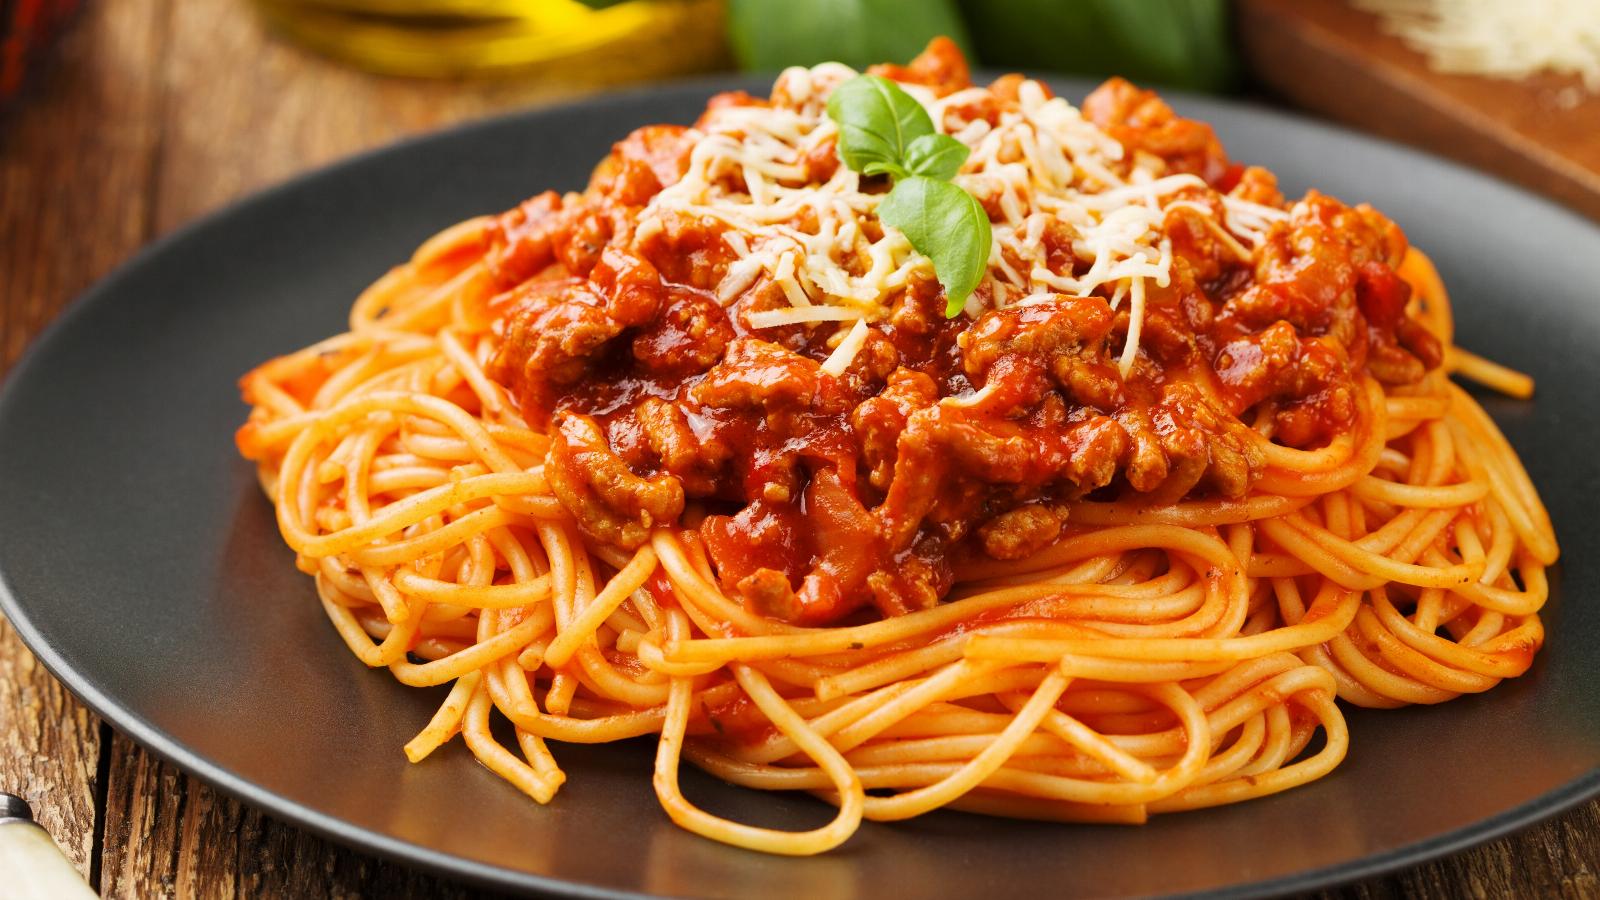 🌶 Spice up These Foods and We’ll Tell You What Color Empowers You Spaghetti bolognese